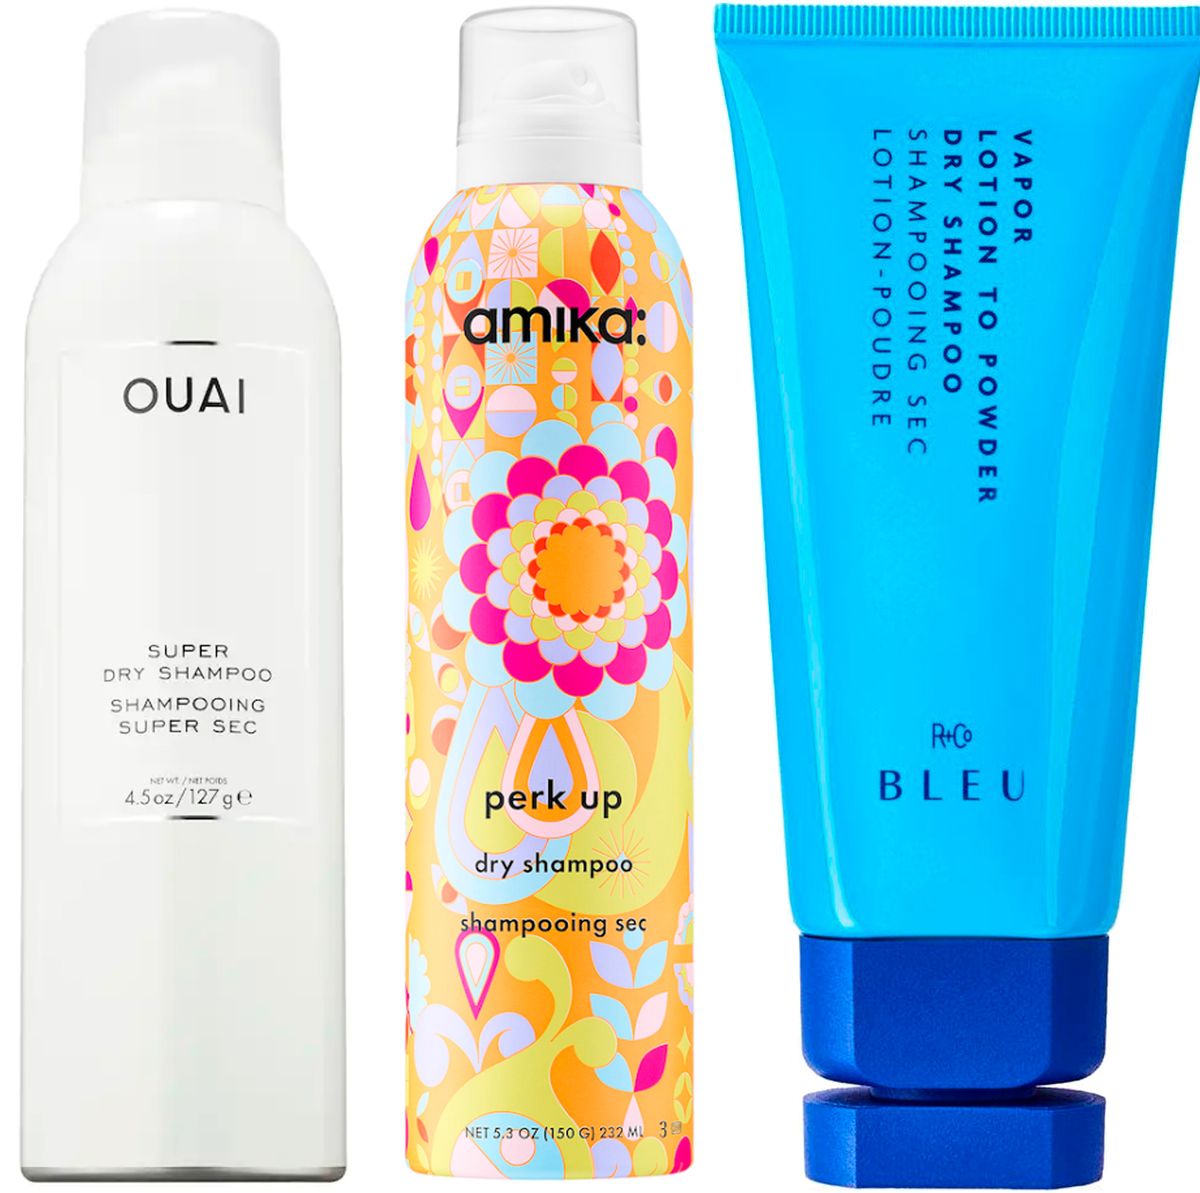 Mindst Sygdom Udgravning The 15 Best Dry Shampoos of 2023 - Dry Shampoo for Oily, Fine Hair